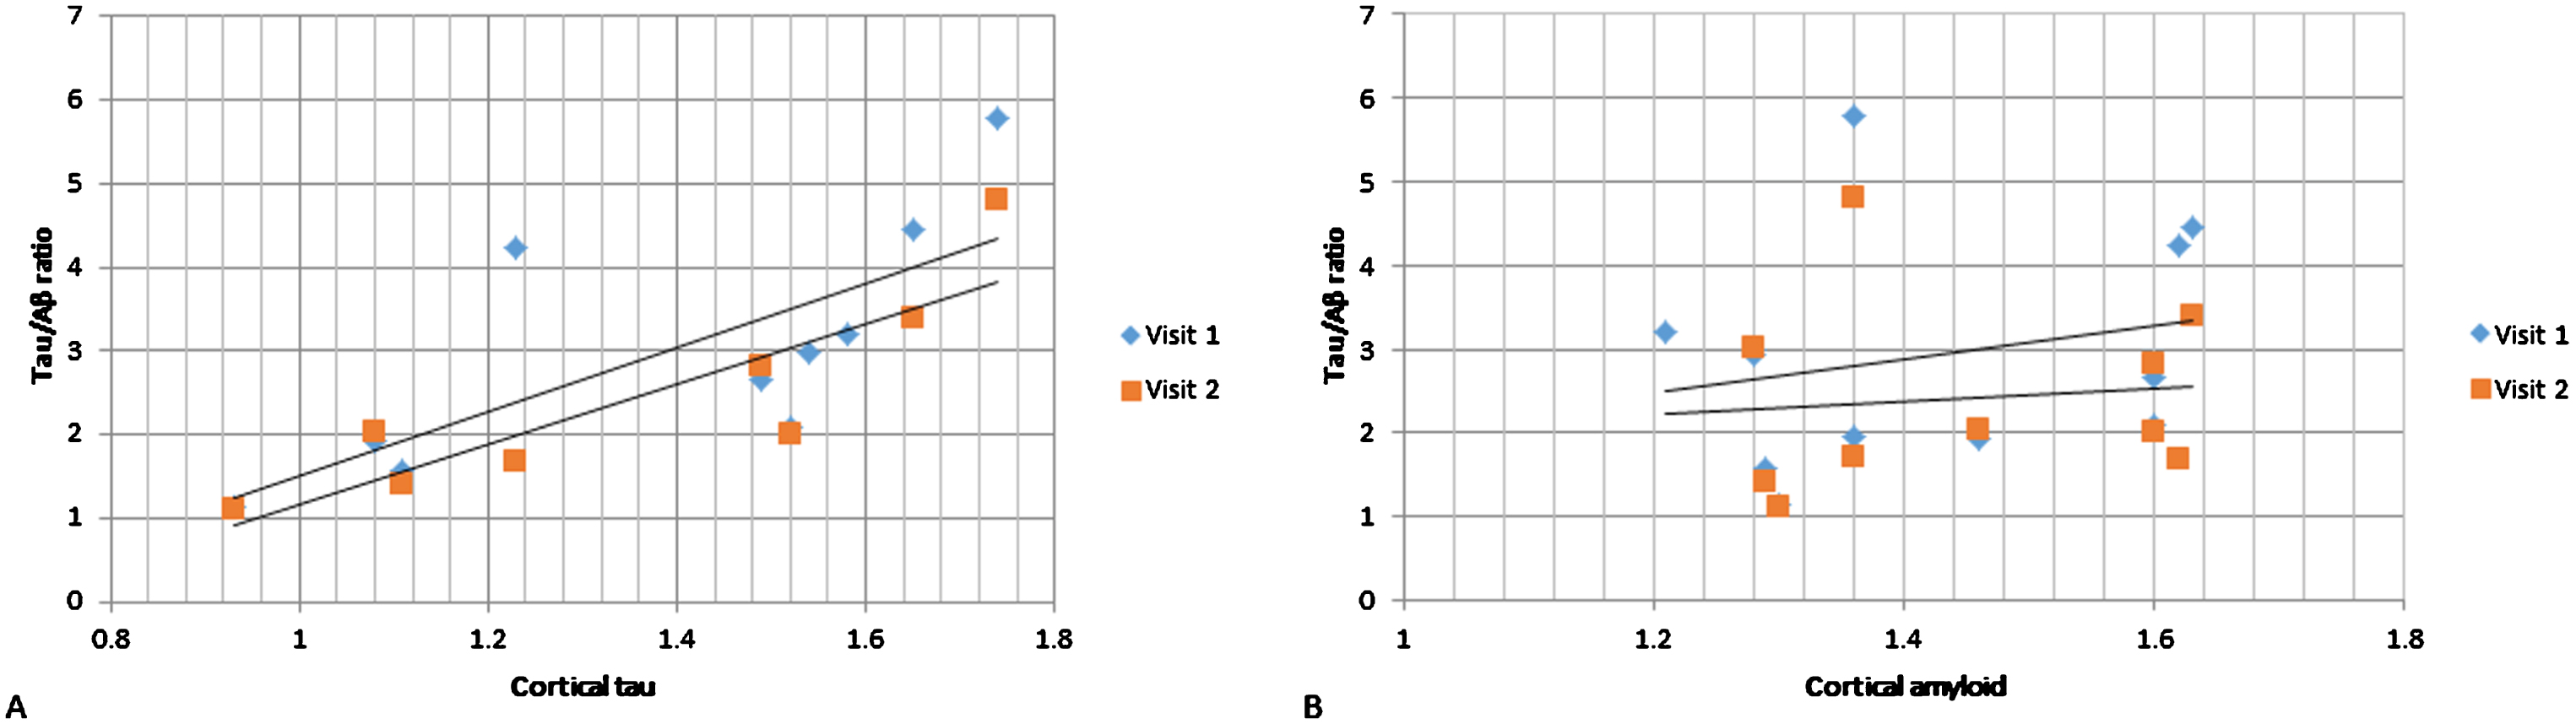 CSF tau/Aβ relationship with PET cortical tau (A) and Aβ (B). On the vertical axes are CSF tau/Aβ ratios and on the horizontal axes are cortical tau (A) and cortical Aβ (B). Visit 1 and Visit 2 CSF measurements in dark gray rombes and light gray rectangles respectively. PET scanning was done at baseline only.